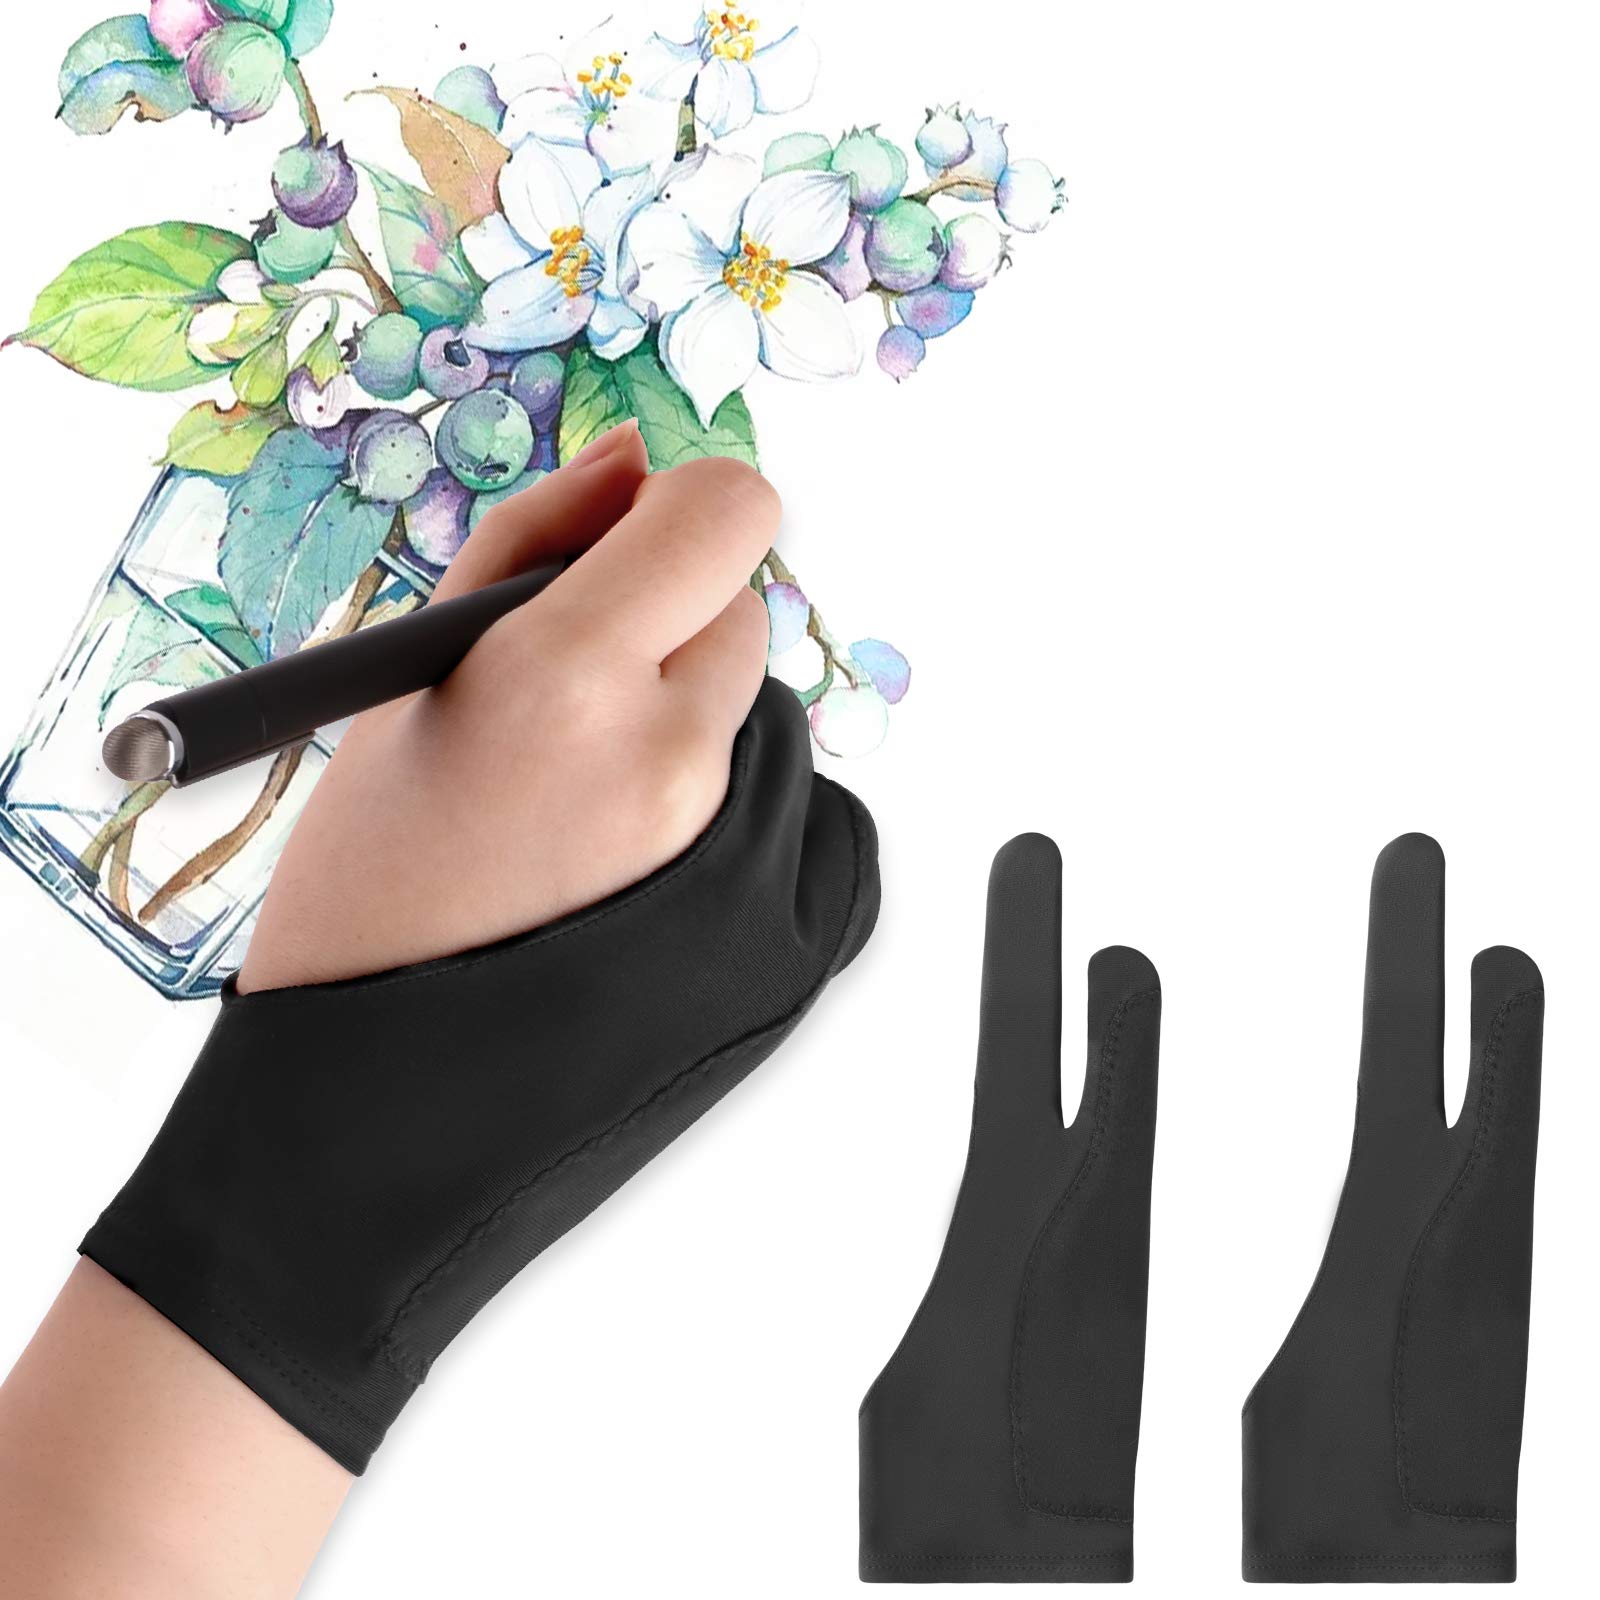 Profesissional Digital Drawing Glove Anti-fouling Right and Left